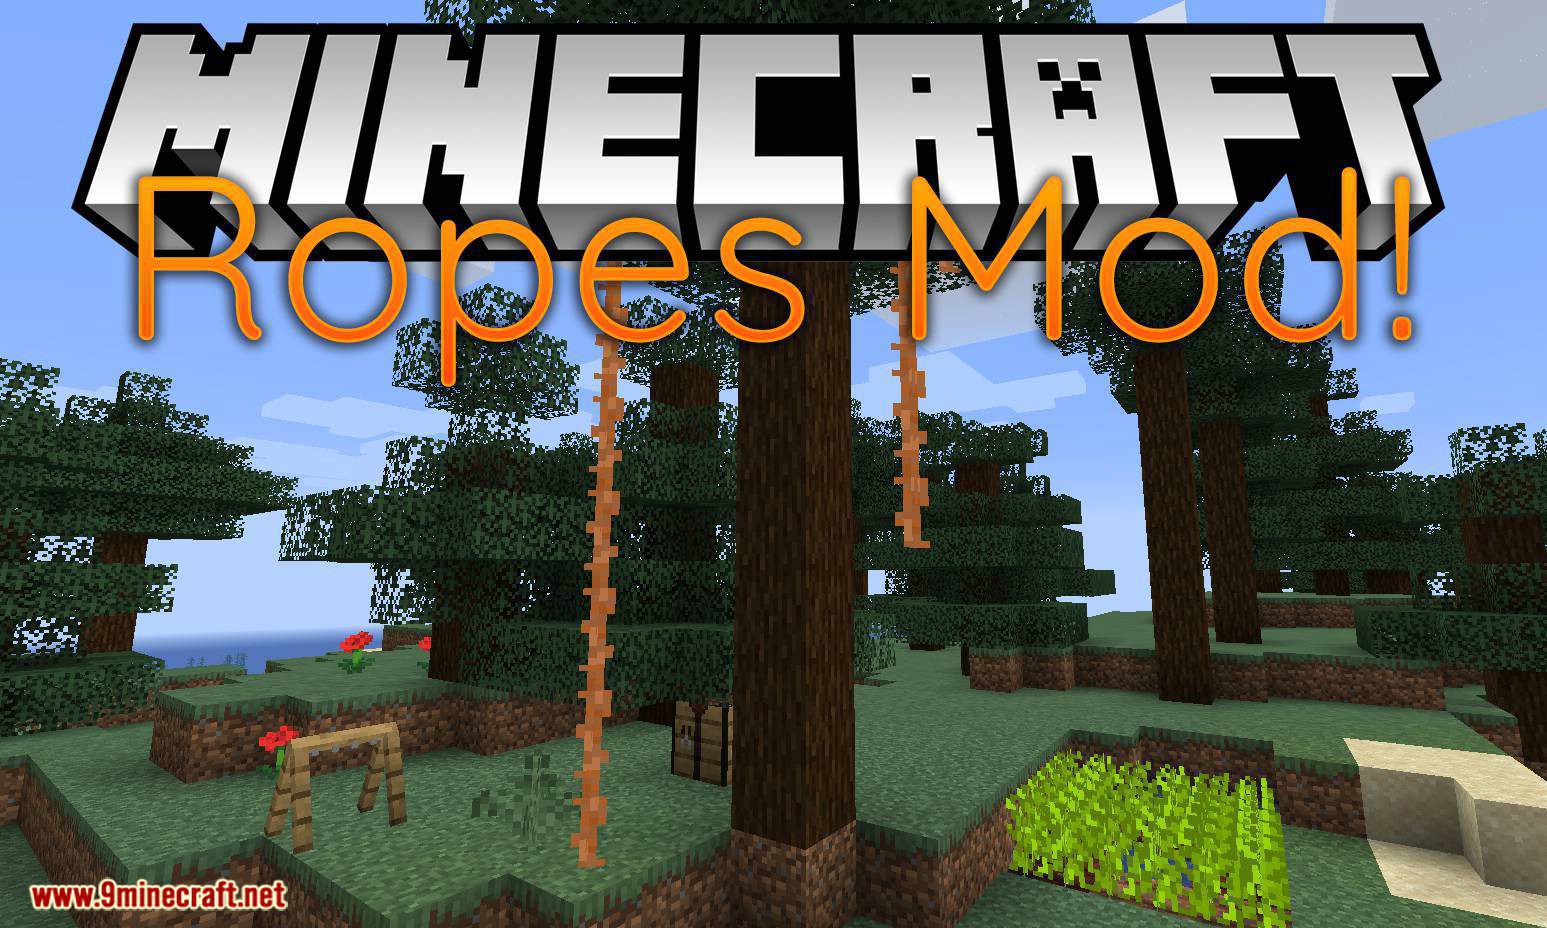 Ropes Mod for minecraft logo